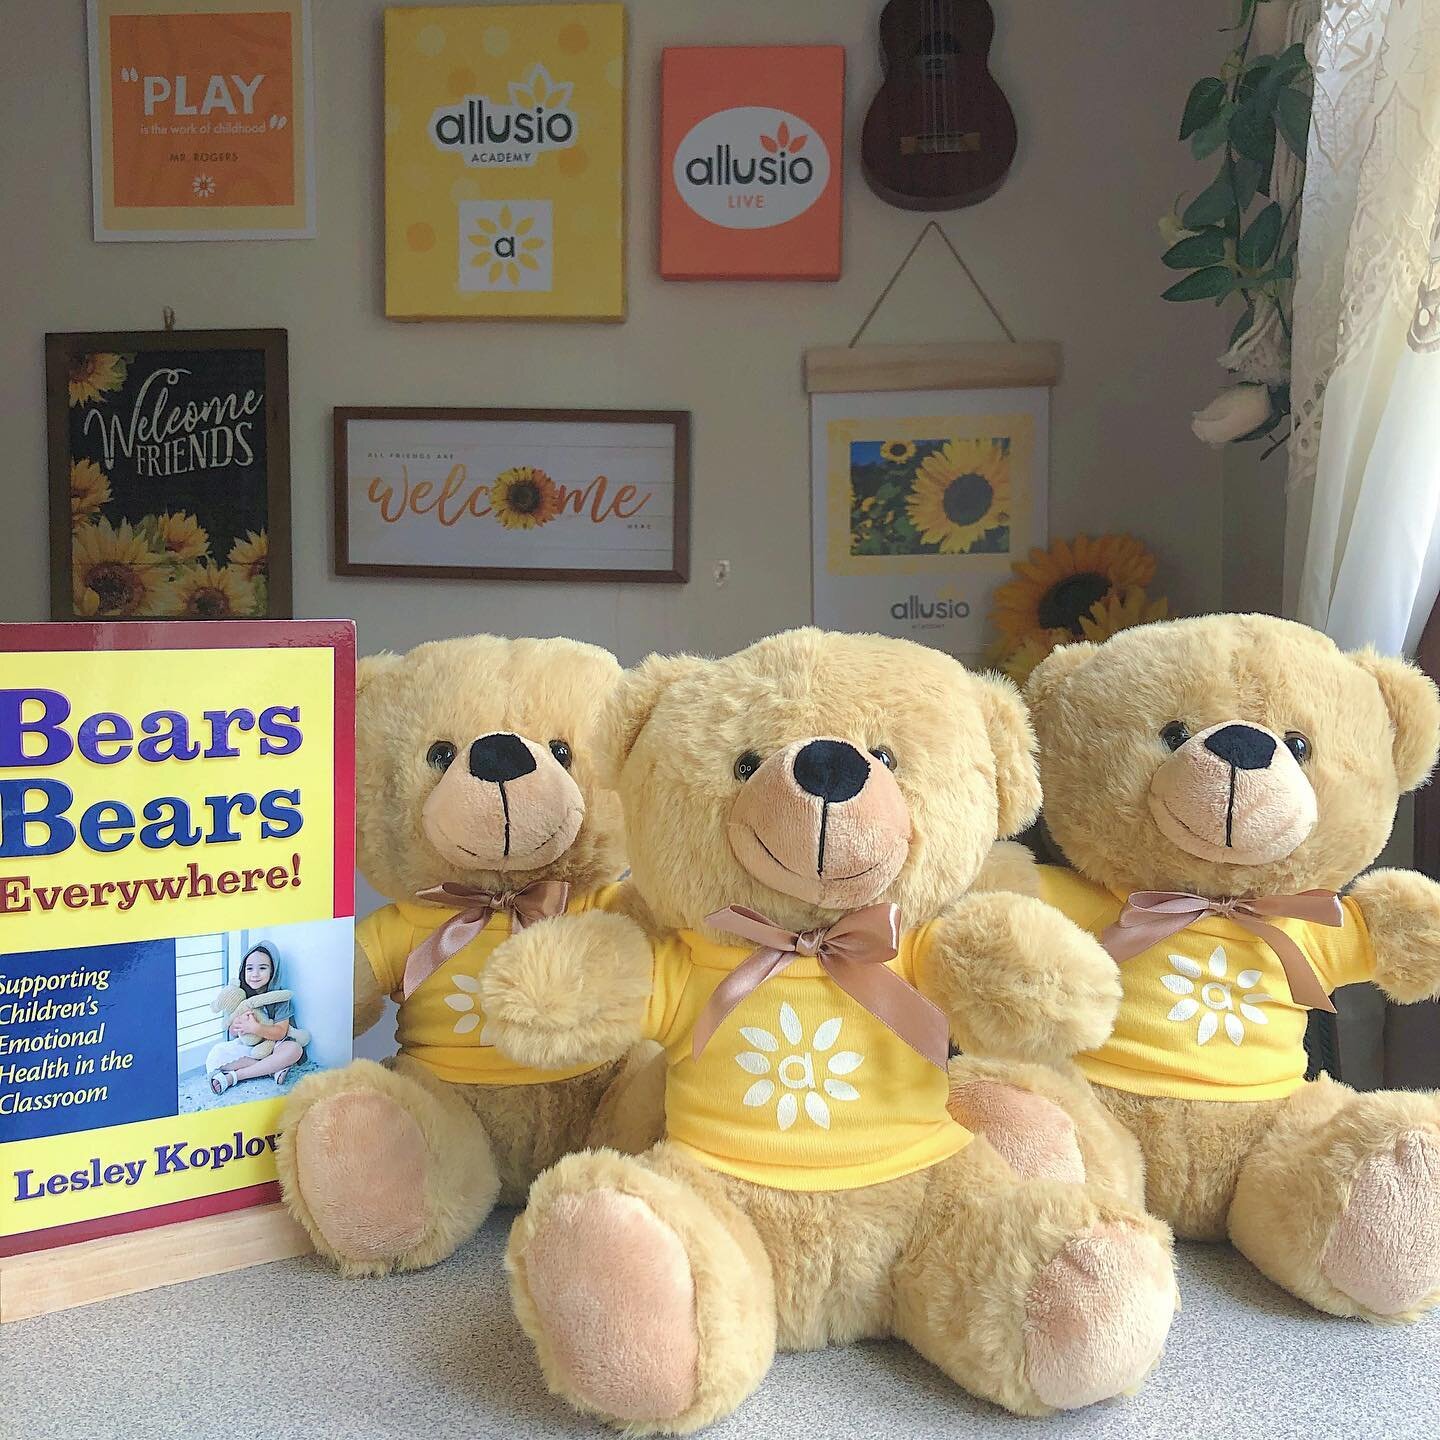 Allusio Live classes start next week, and our favorite teddy bears are ready! 

We&rsquo;ve spent this week getting to know our children in virtual home visits. Next week, these lovely bears will be in every family&rsquo;s home with our welcome packa